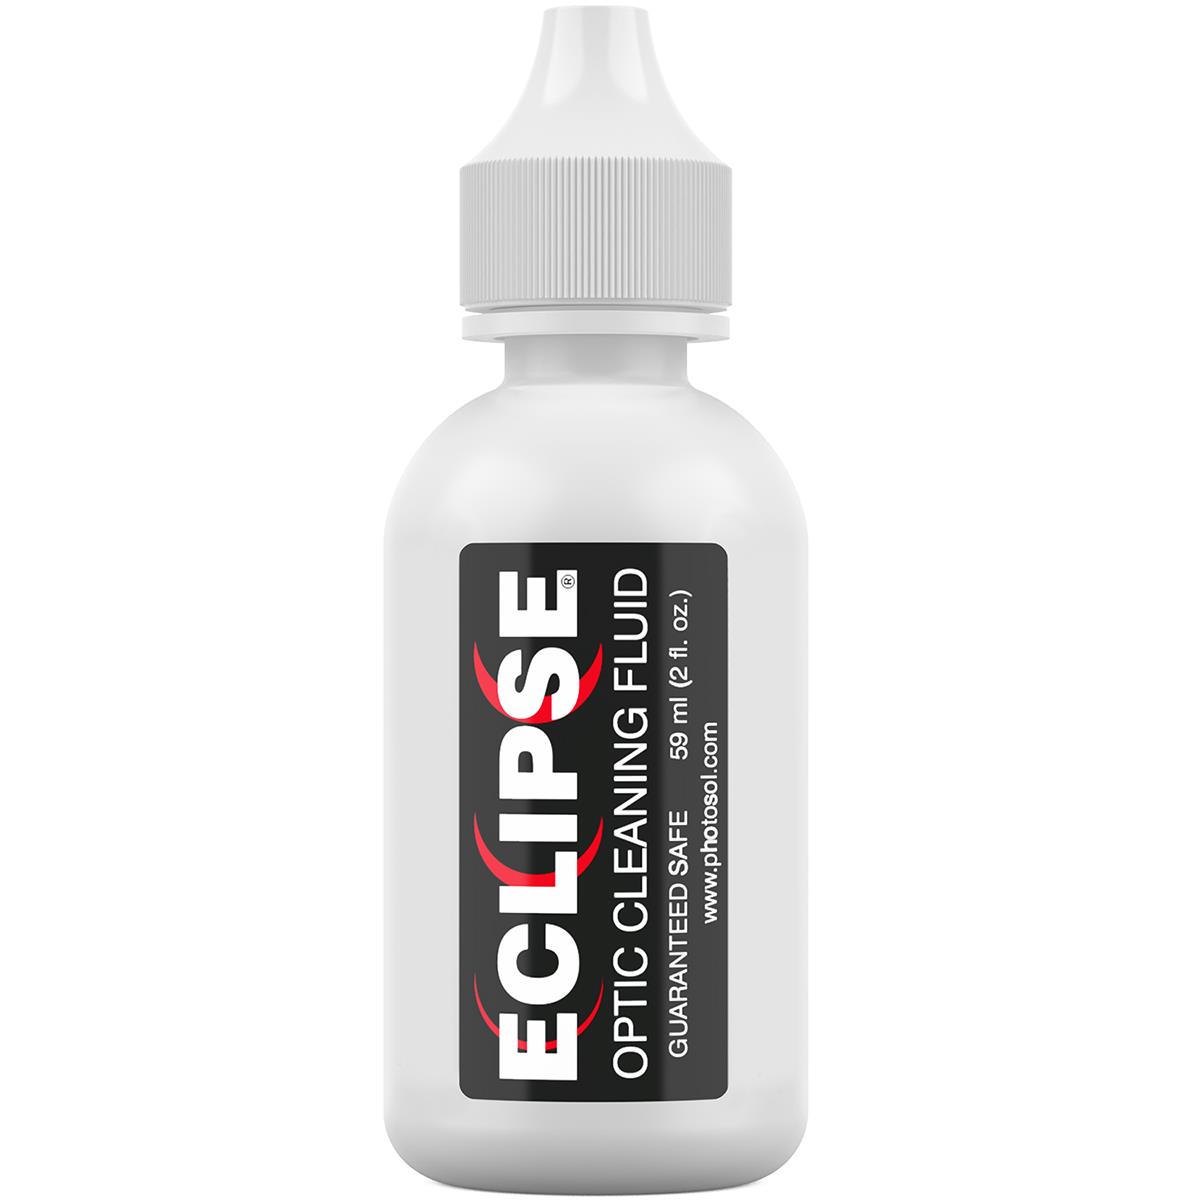 Image of Photographic Solutions EC Eclipse Cleaner